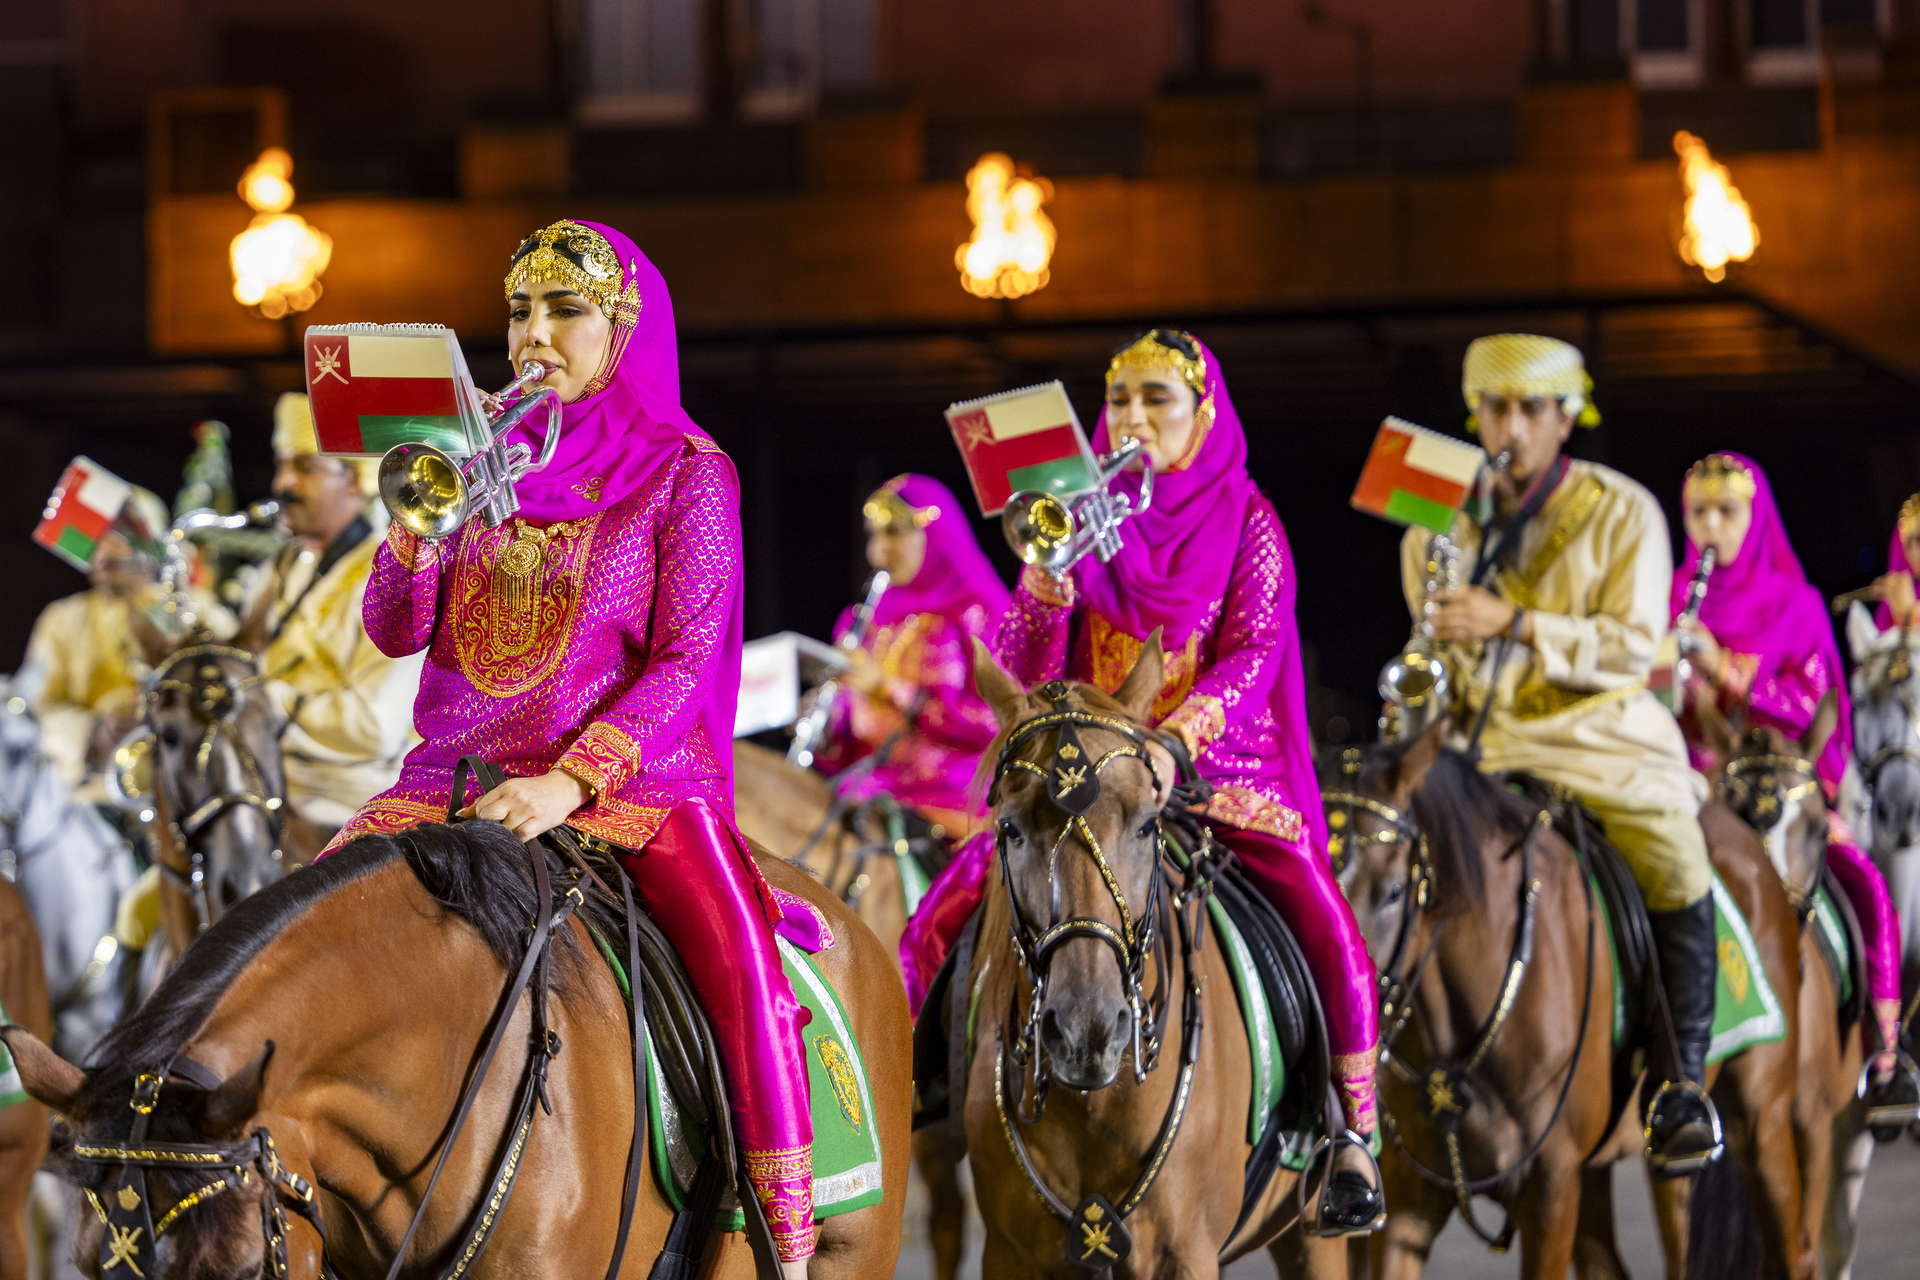 The Combined Bands of the Royal Cavalry and the Royal Gurd of Oman in der Kaserne Basel auf Pferden